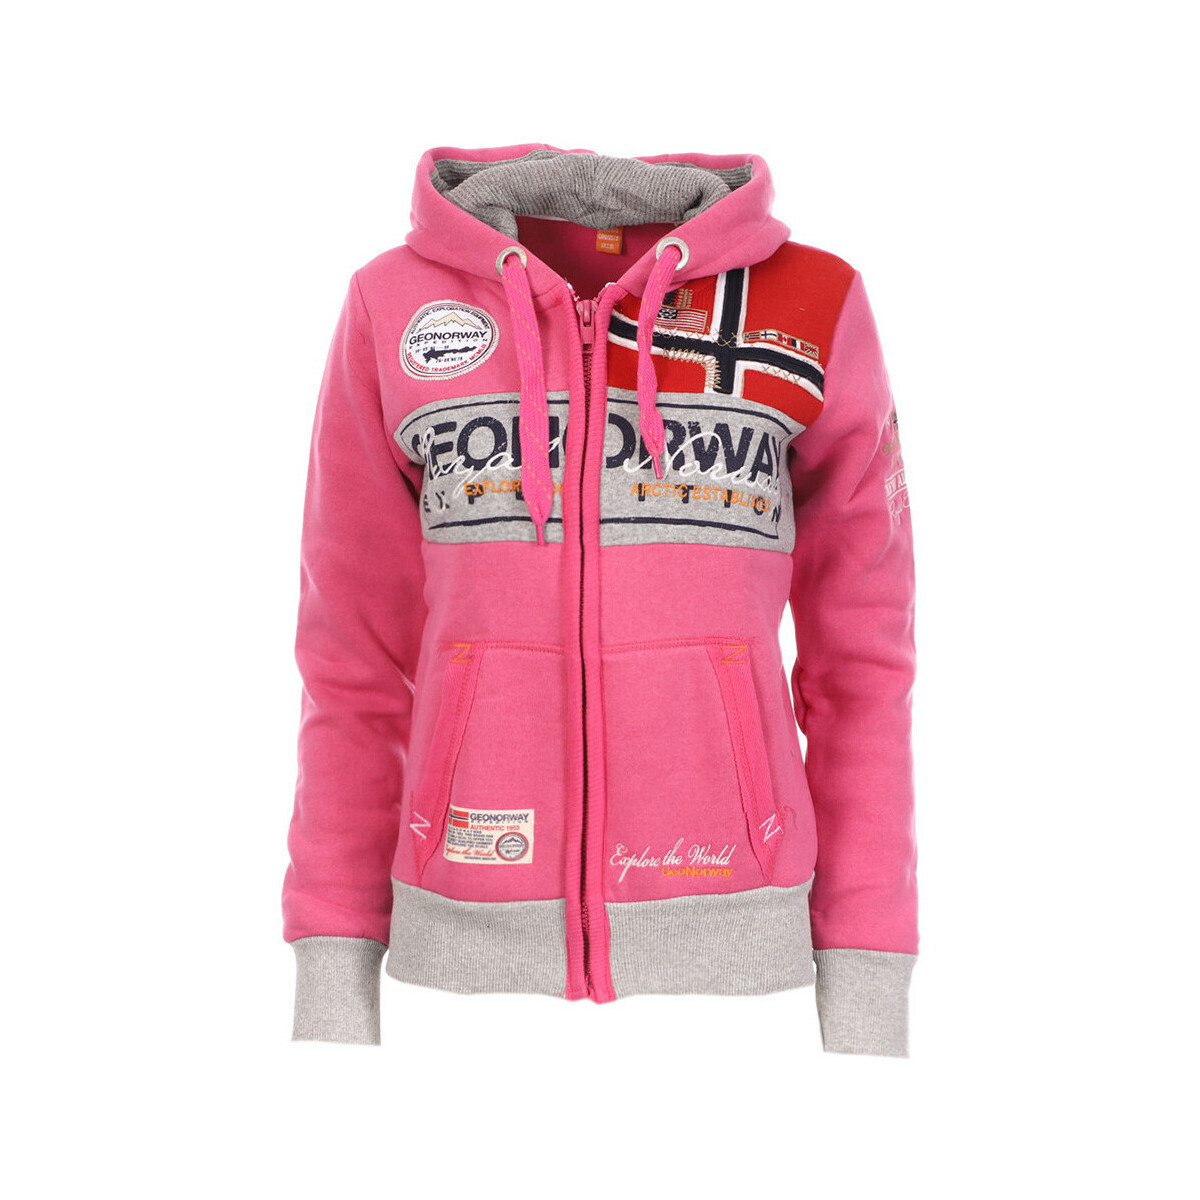 Textiel Dames Sweaters / Sweatshirts Geographical Norway  Roze